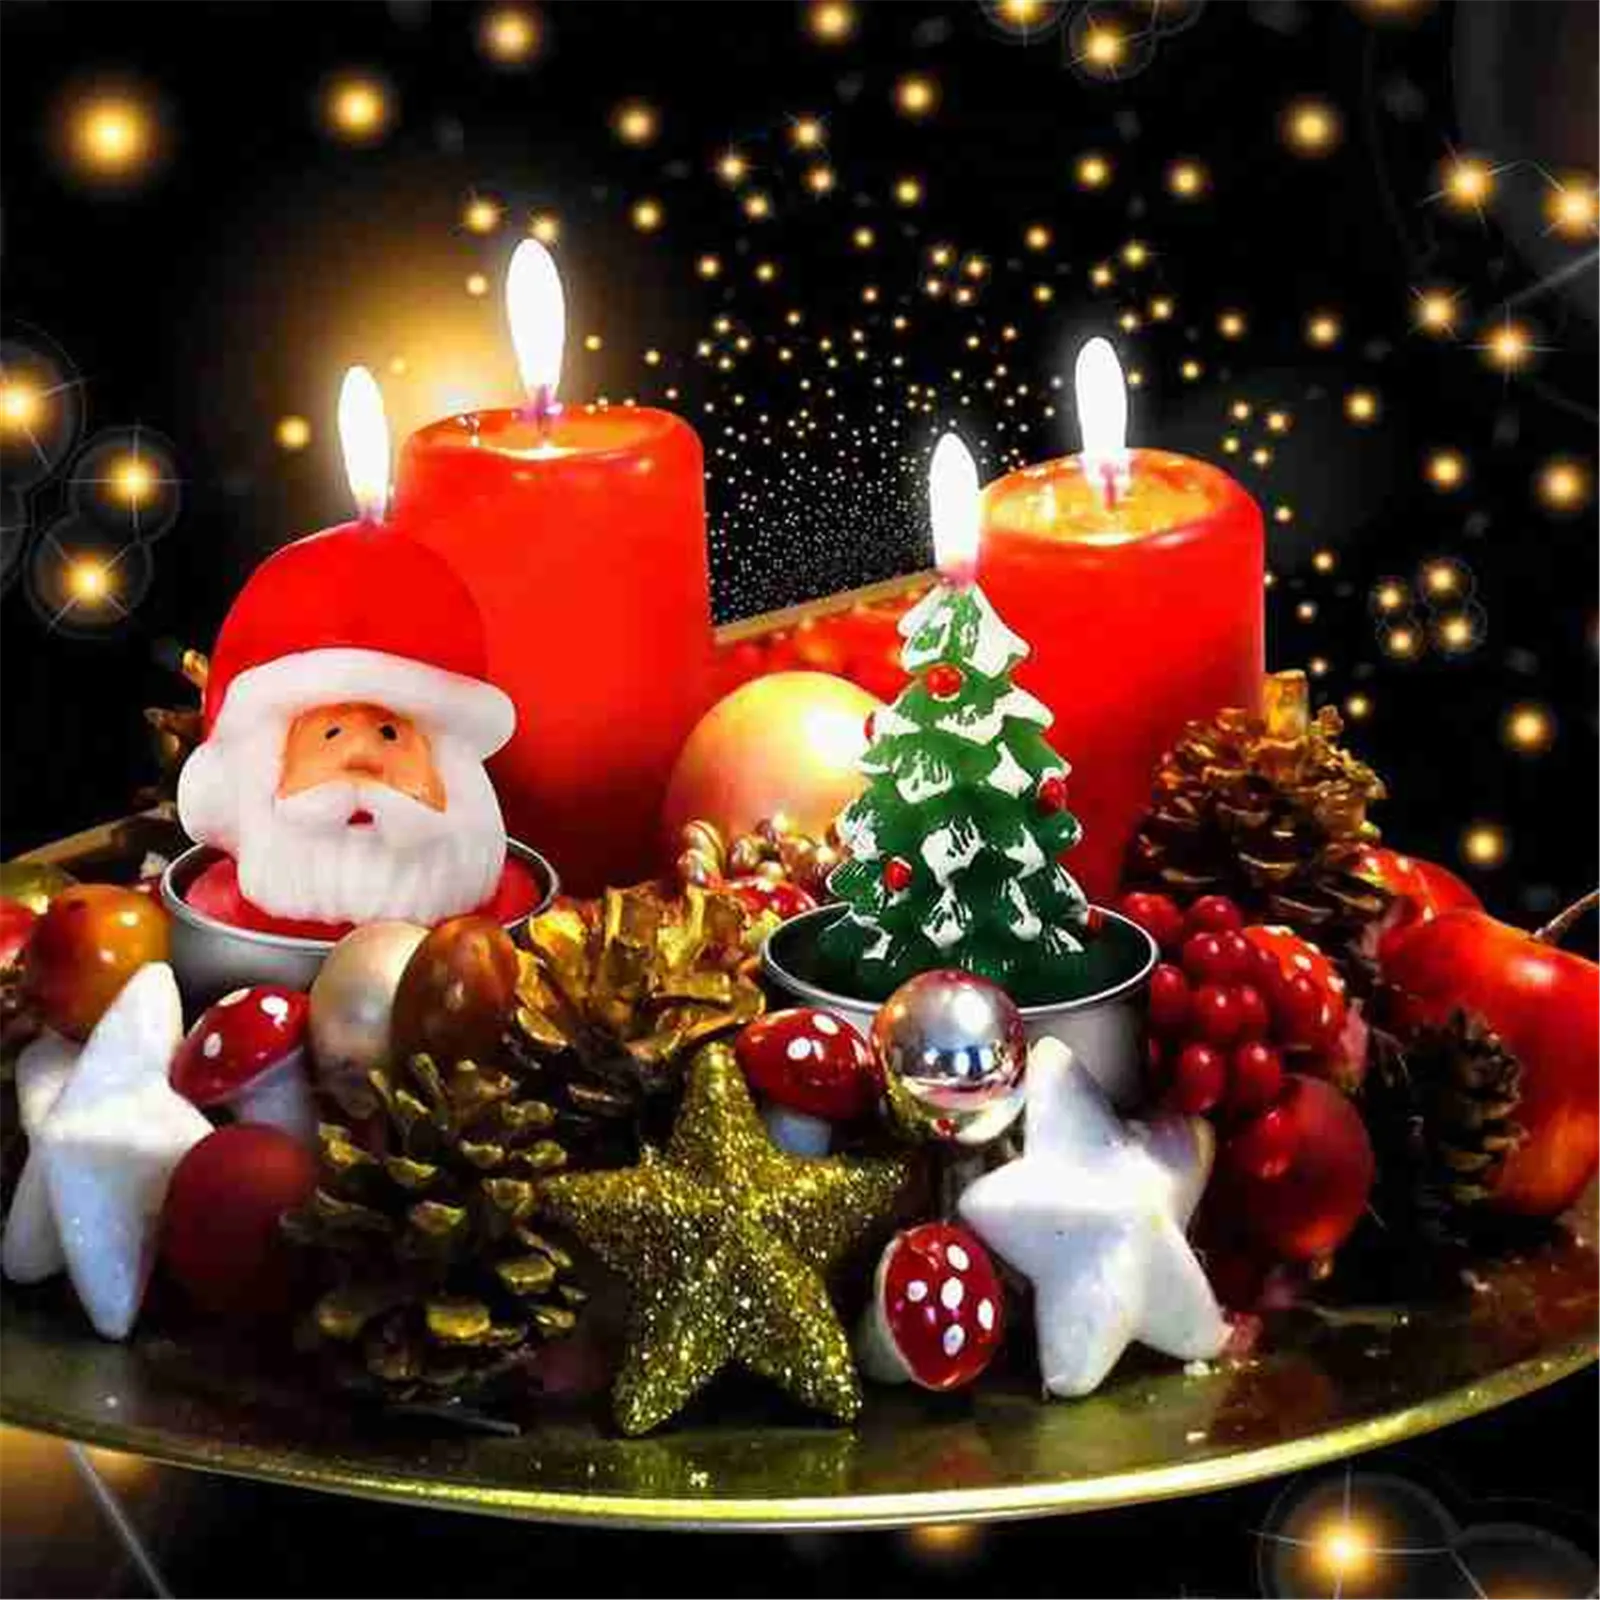 

3PC/Set Christmas Candles Snowman Xmas Tree Scented Paraffin Pine Cones Party Ornaments Santa 3D Home Decor 2022 Aroma Gifts